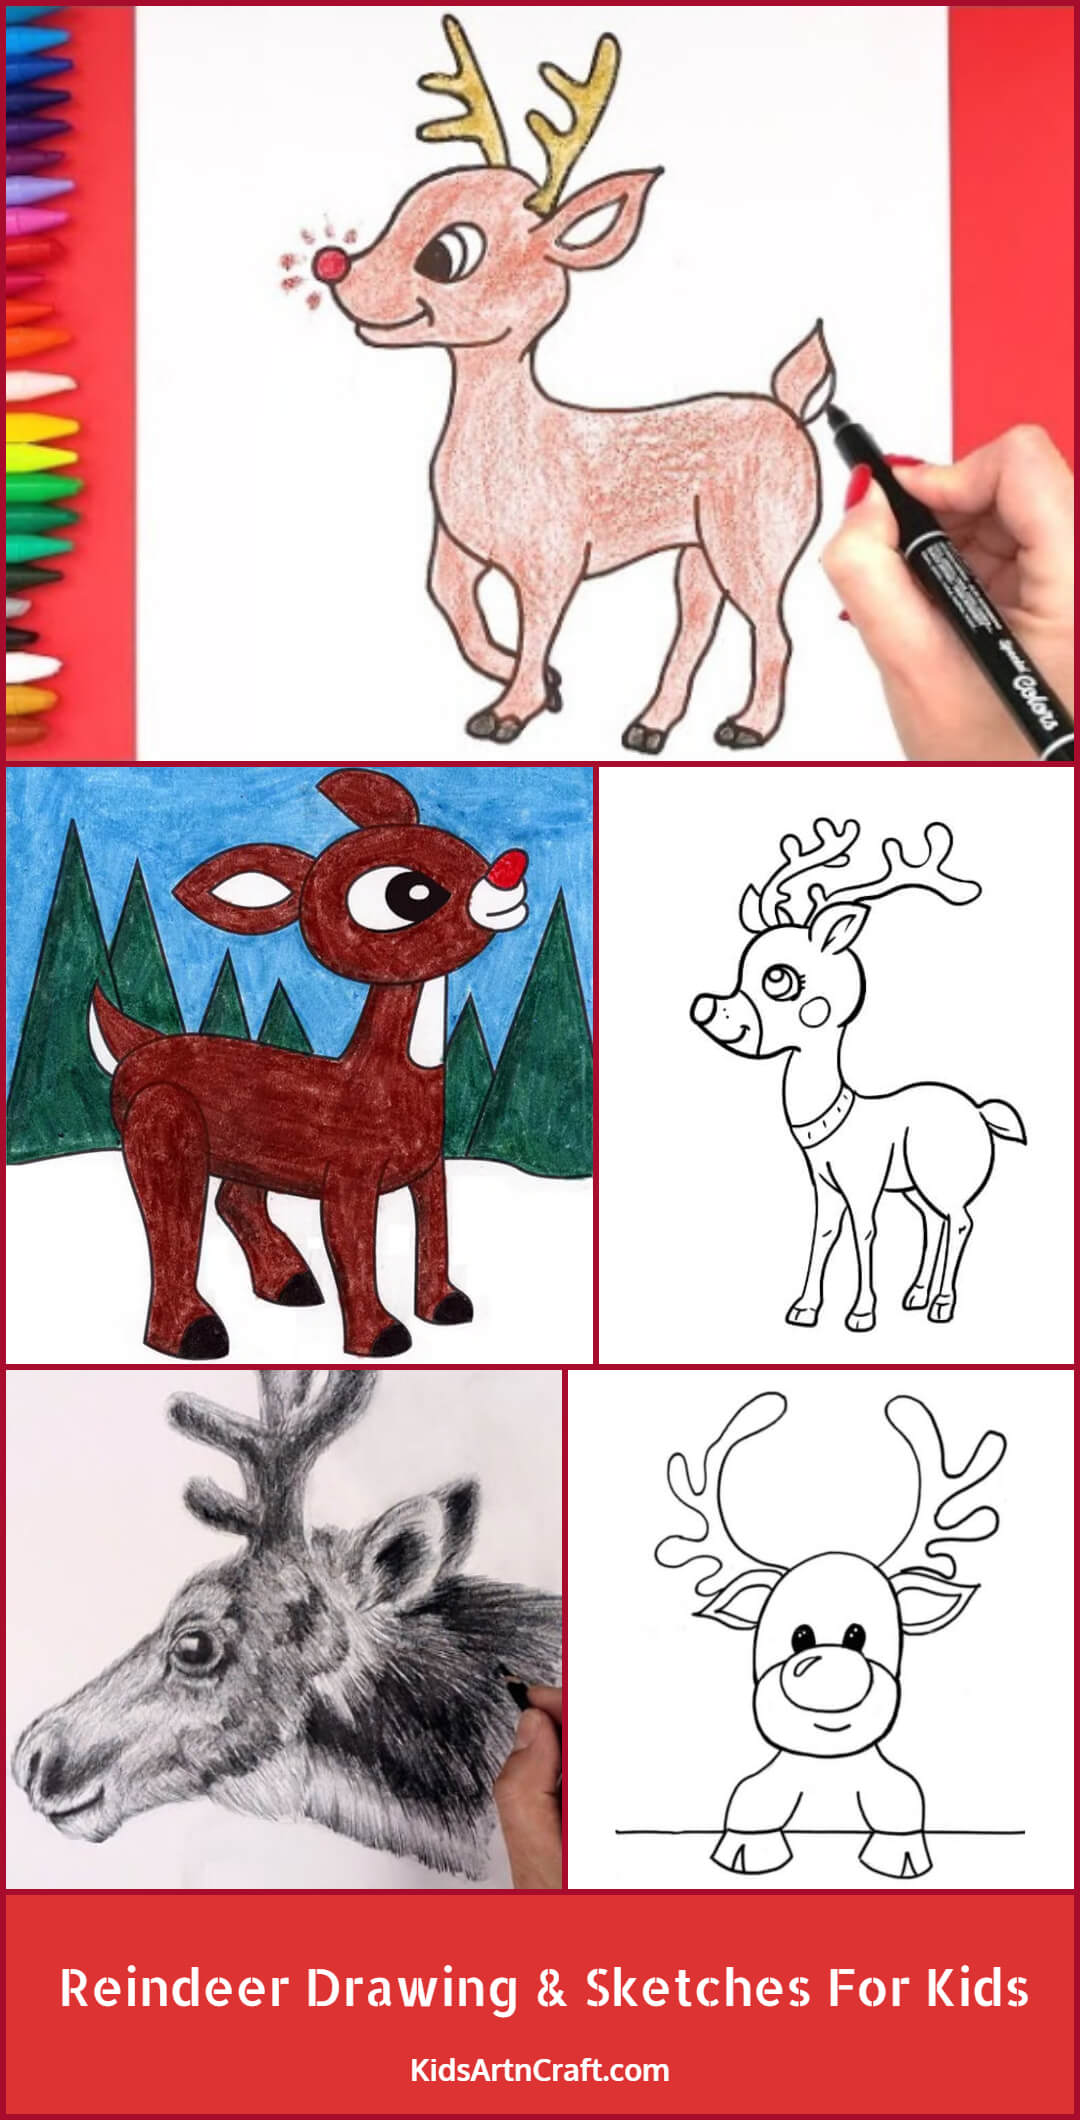 Reindeer Drawing & Sketches For Kids